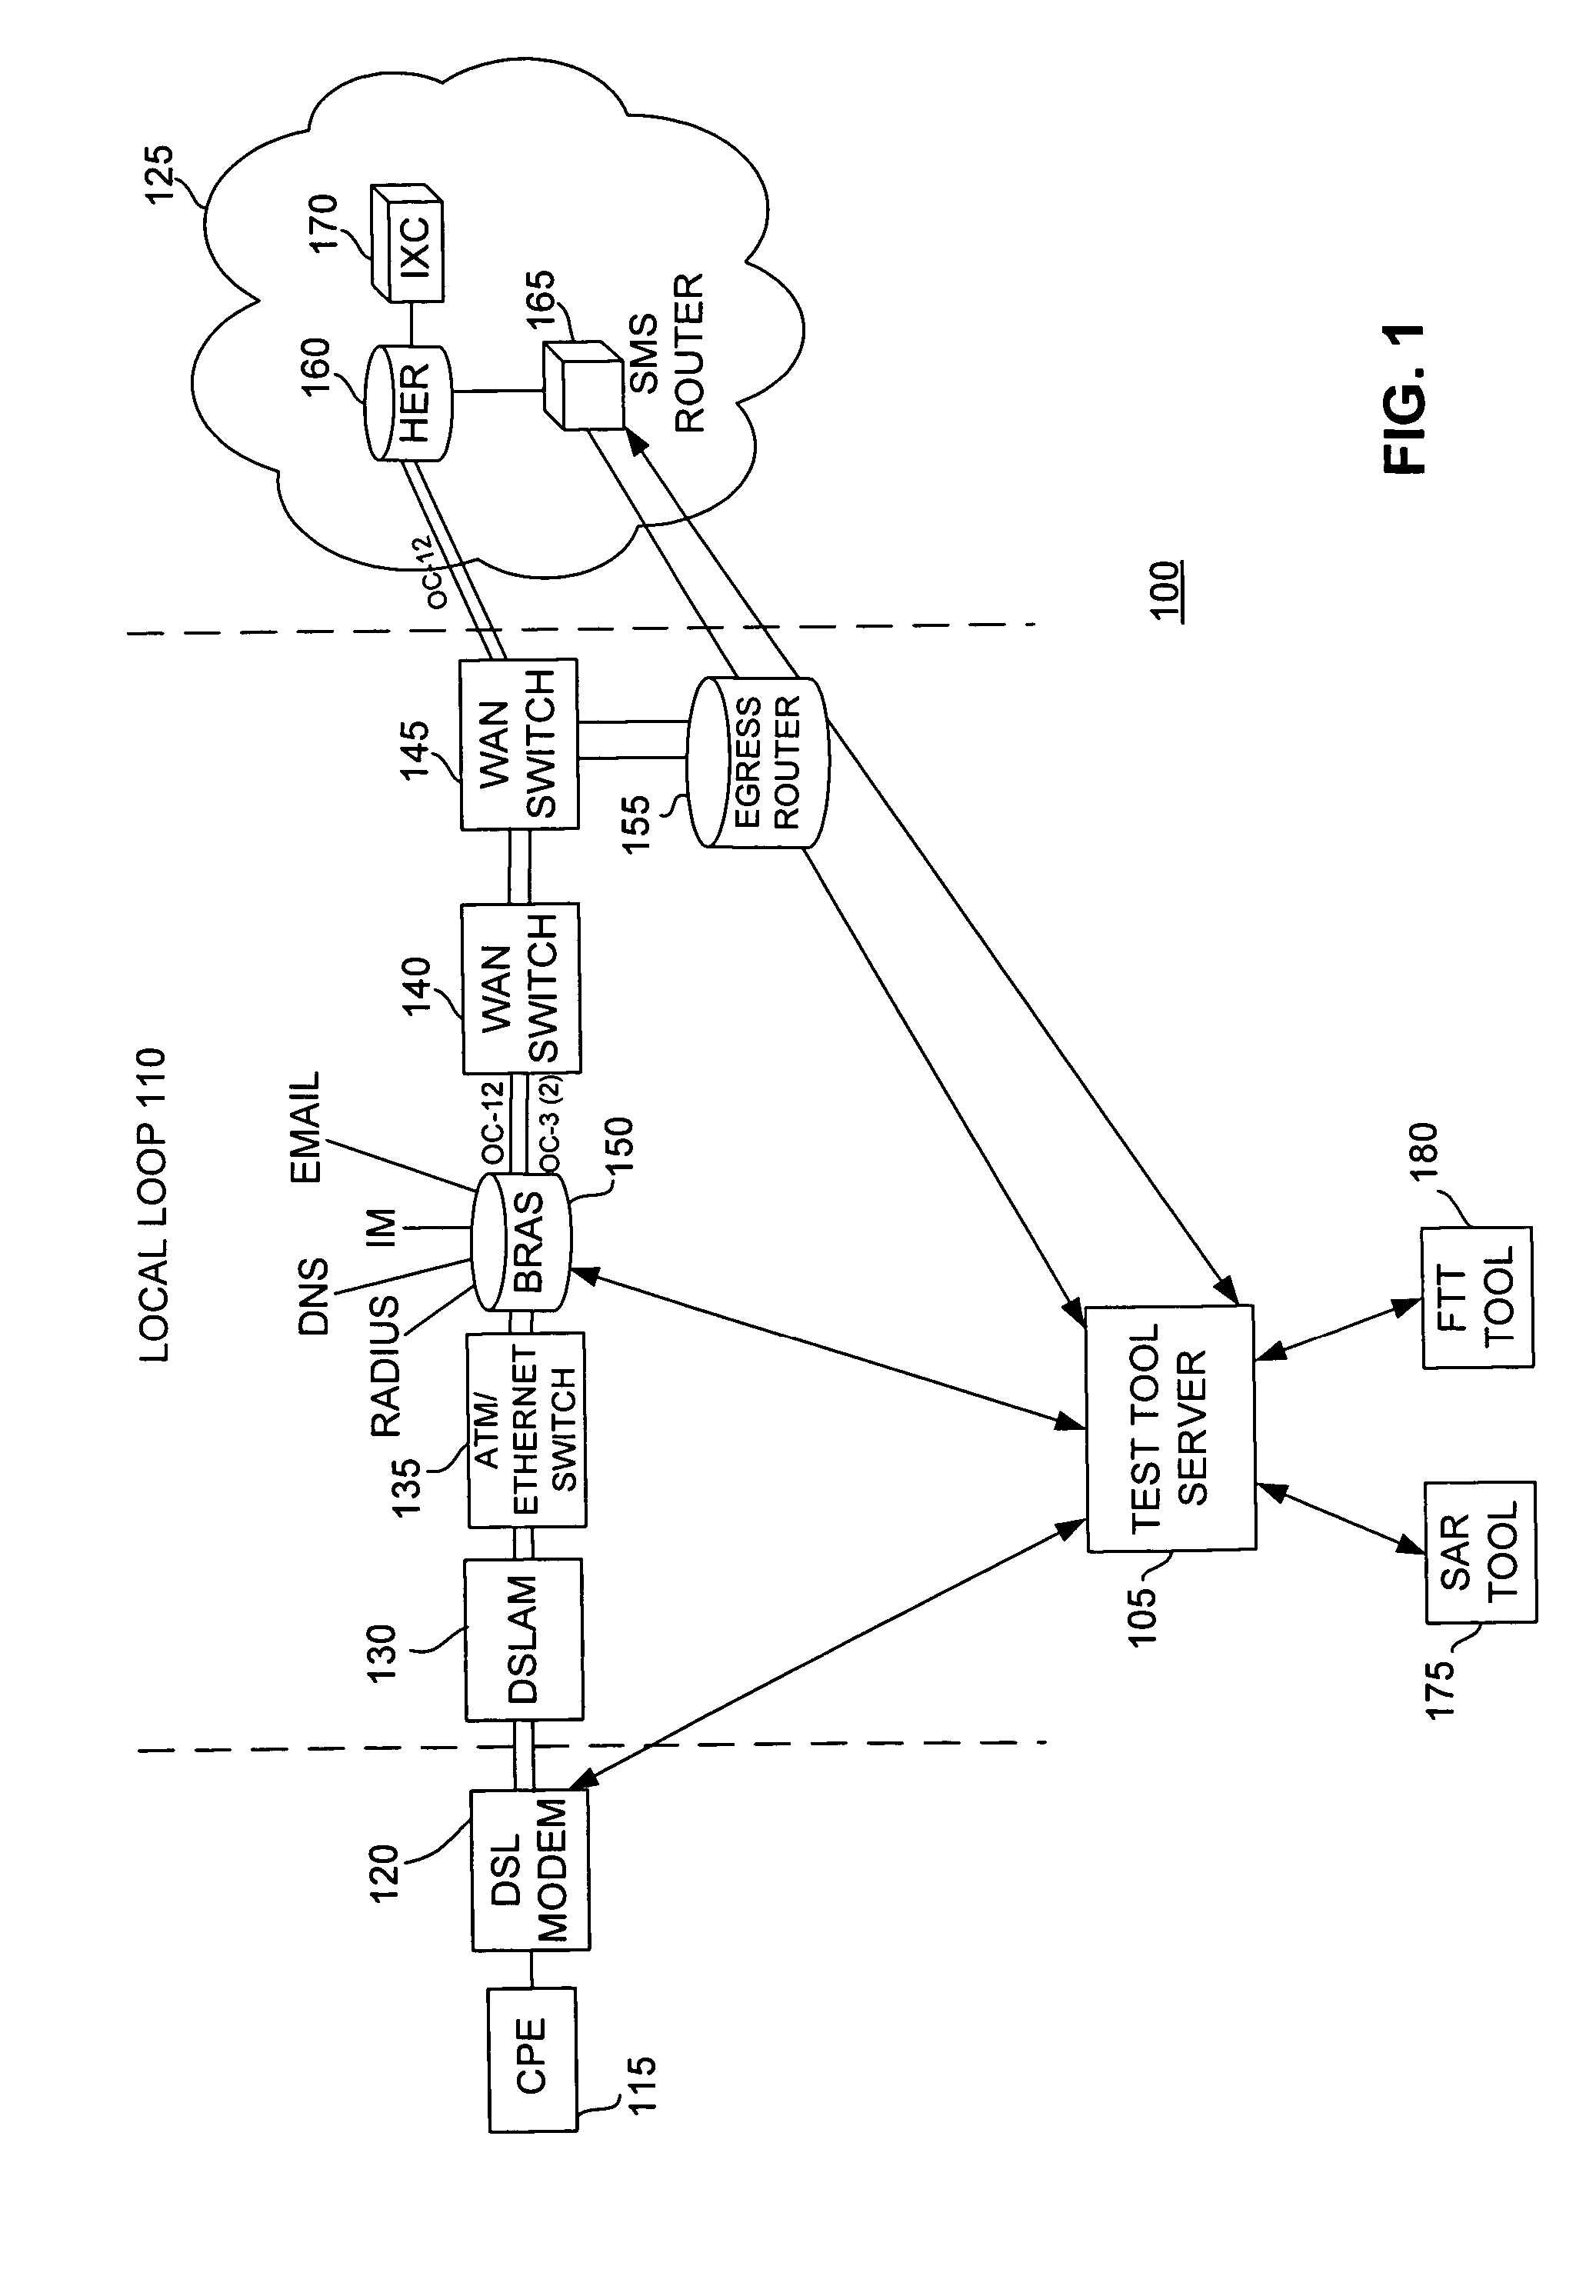 Methods and systems for providing end-to-end testing of an IP-enabled network